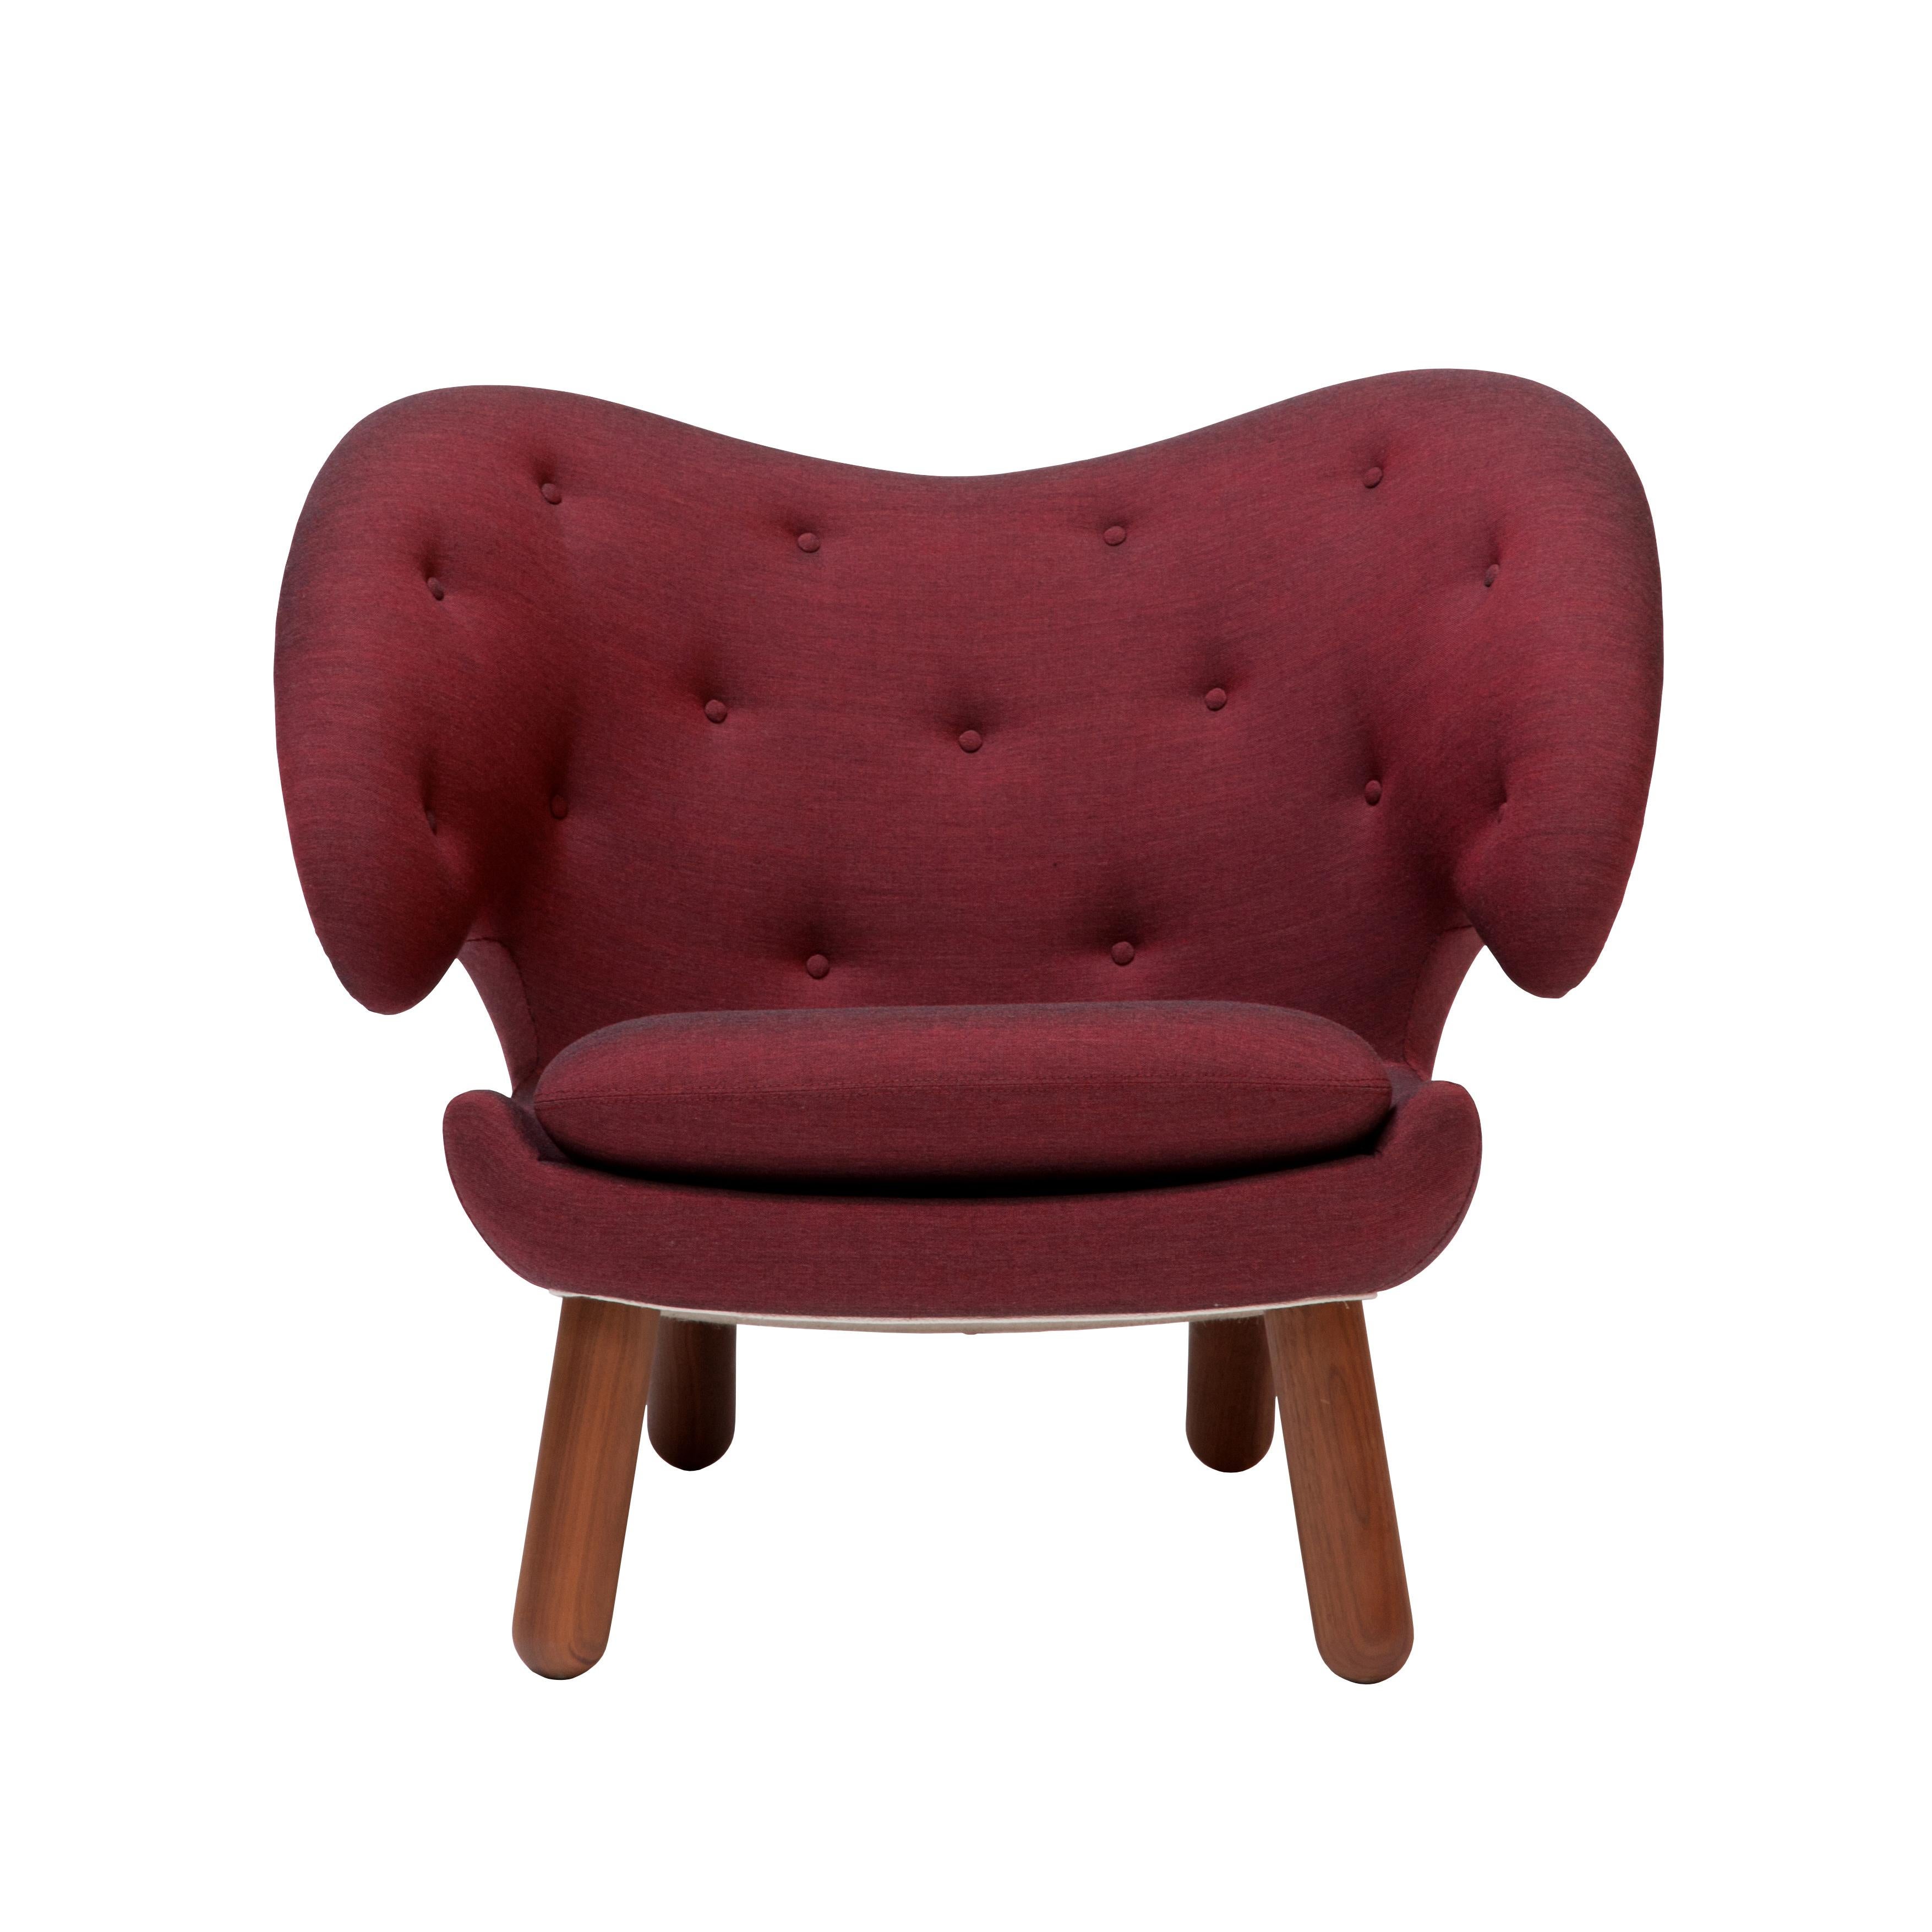 Fabric Set of Two Pelican Chairs in Garnet Kvadrat Remix and Wood by Finn Juhl